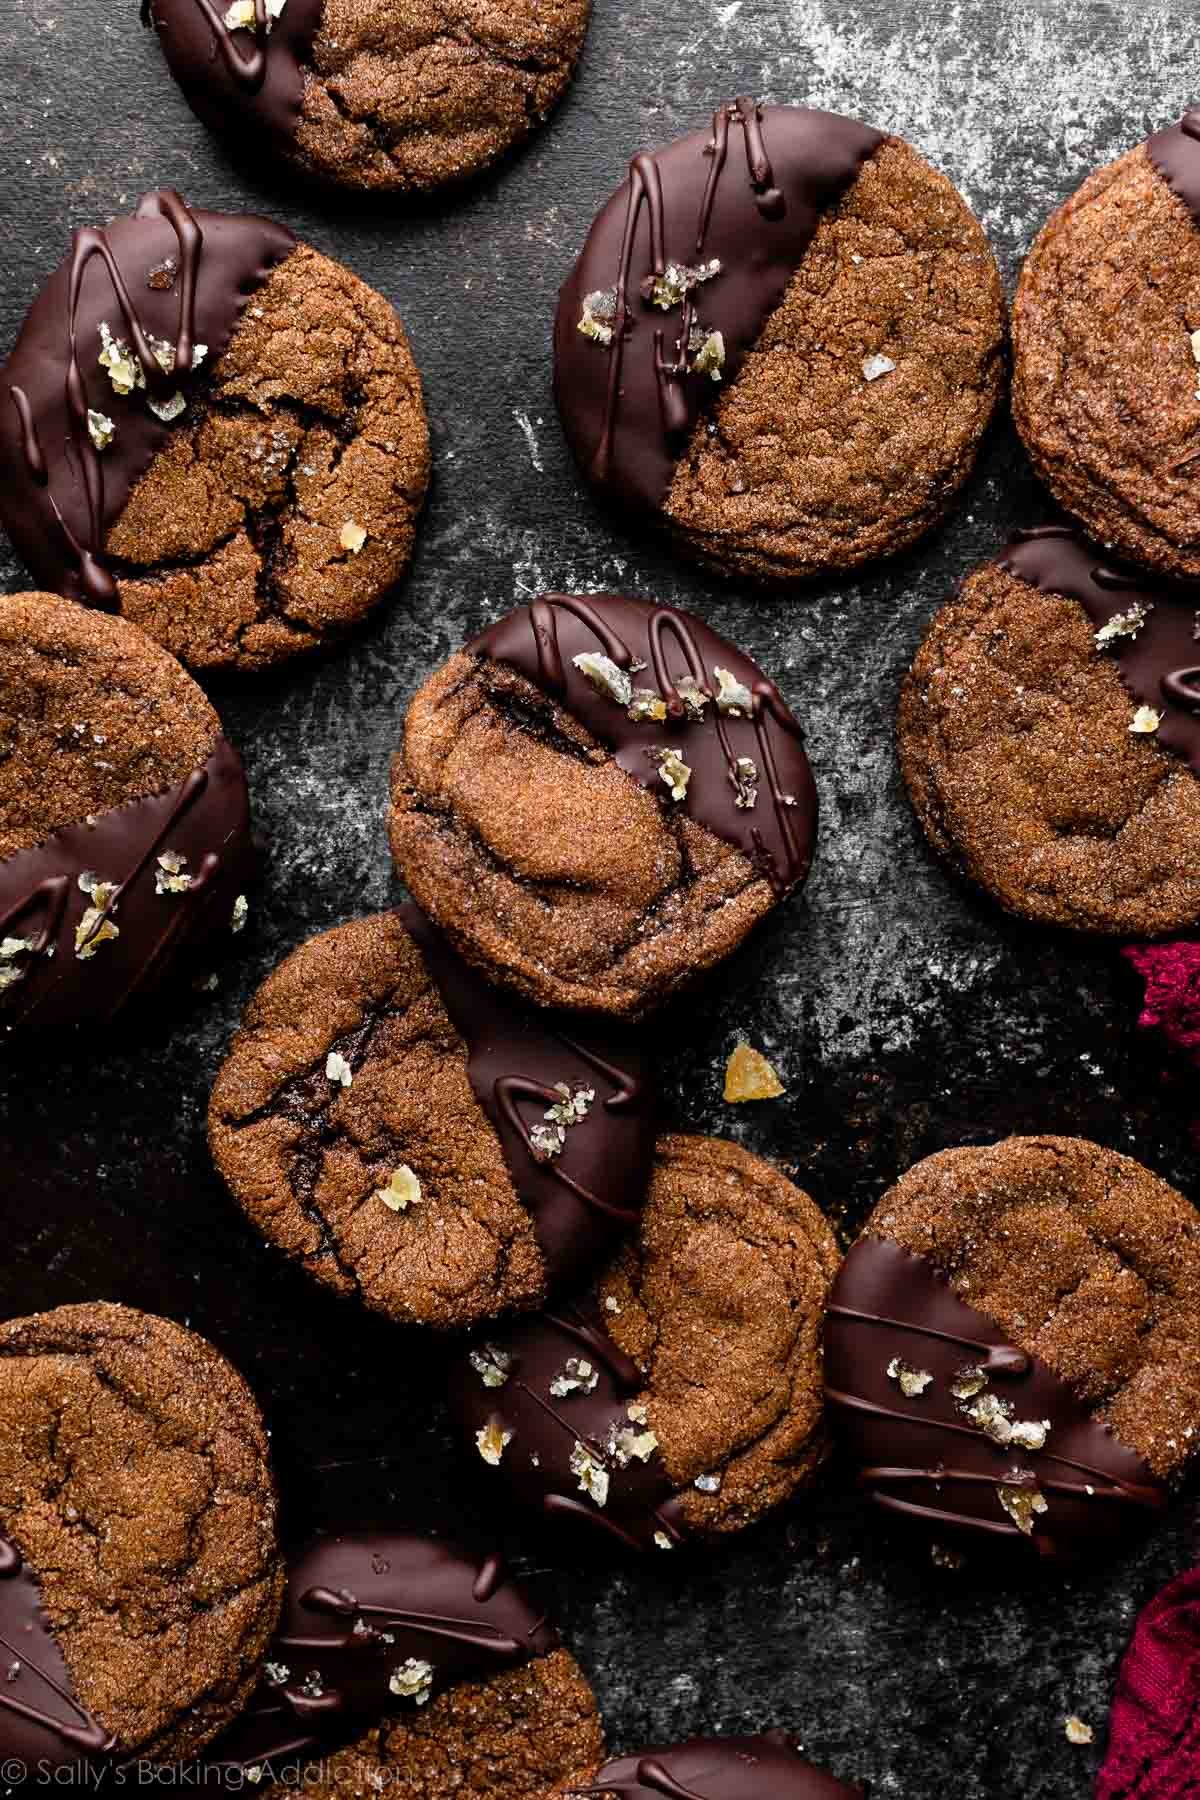 chocolate ginger cookies dipped in dark chocolate and arranged on black and gray board.